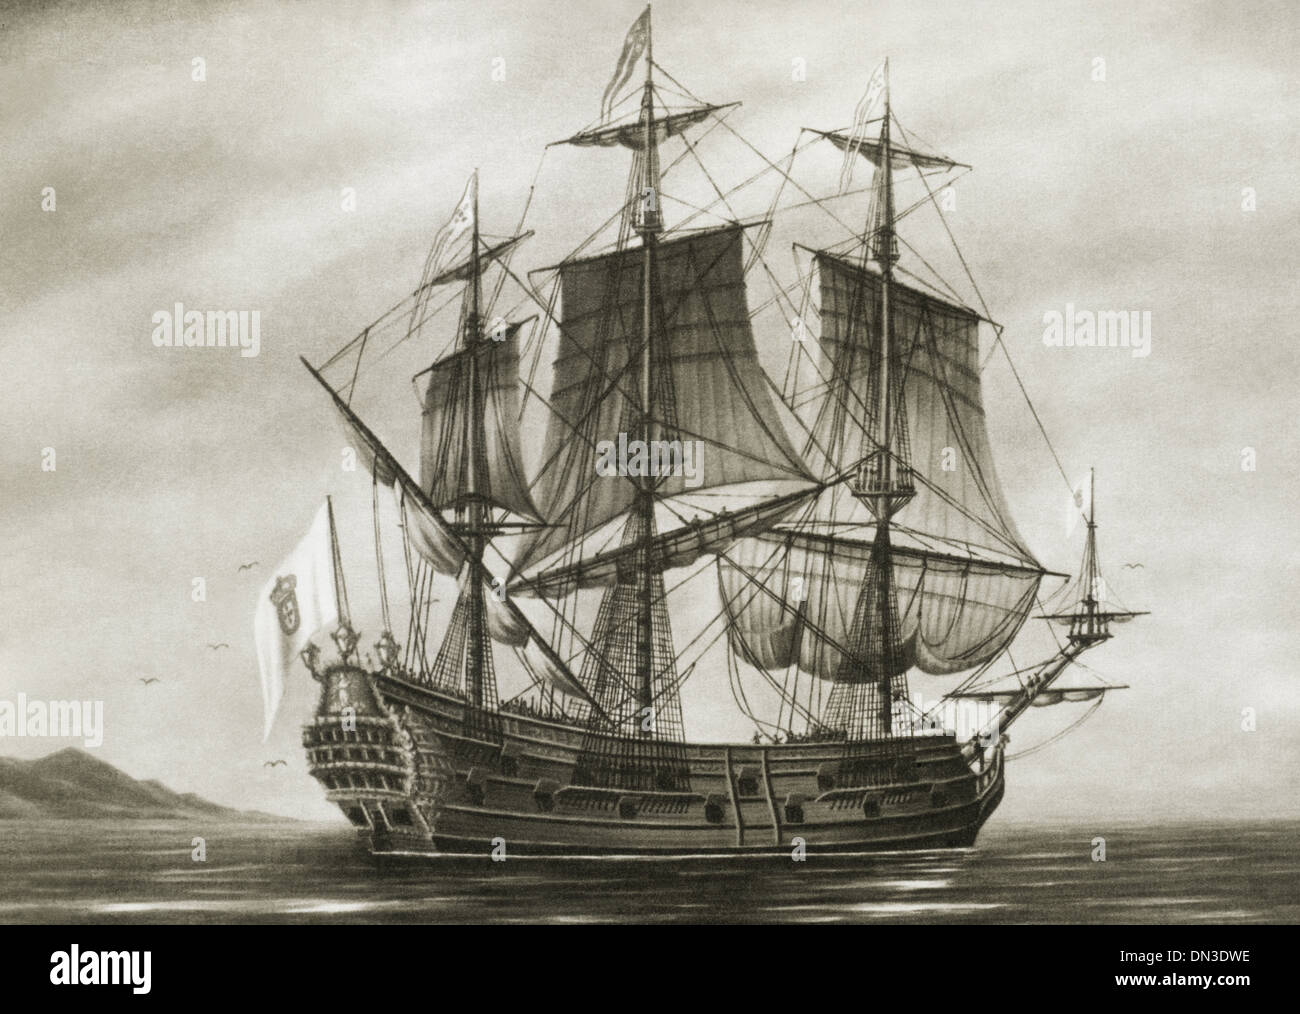 Galleon Saint Lucia. 17th century. expedition to northern Brazil, commanded by English captain Robert Thornton. Engraving. Stock Photo